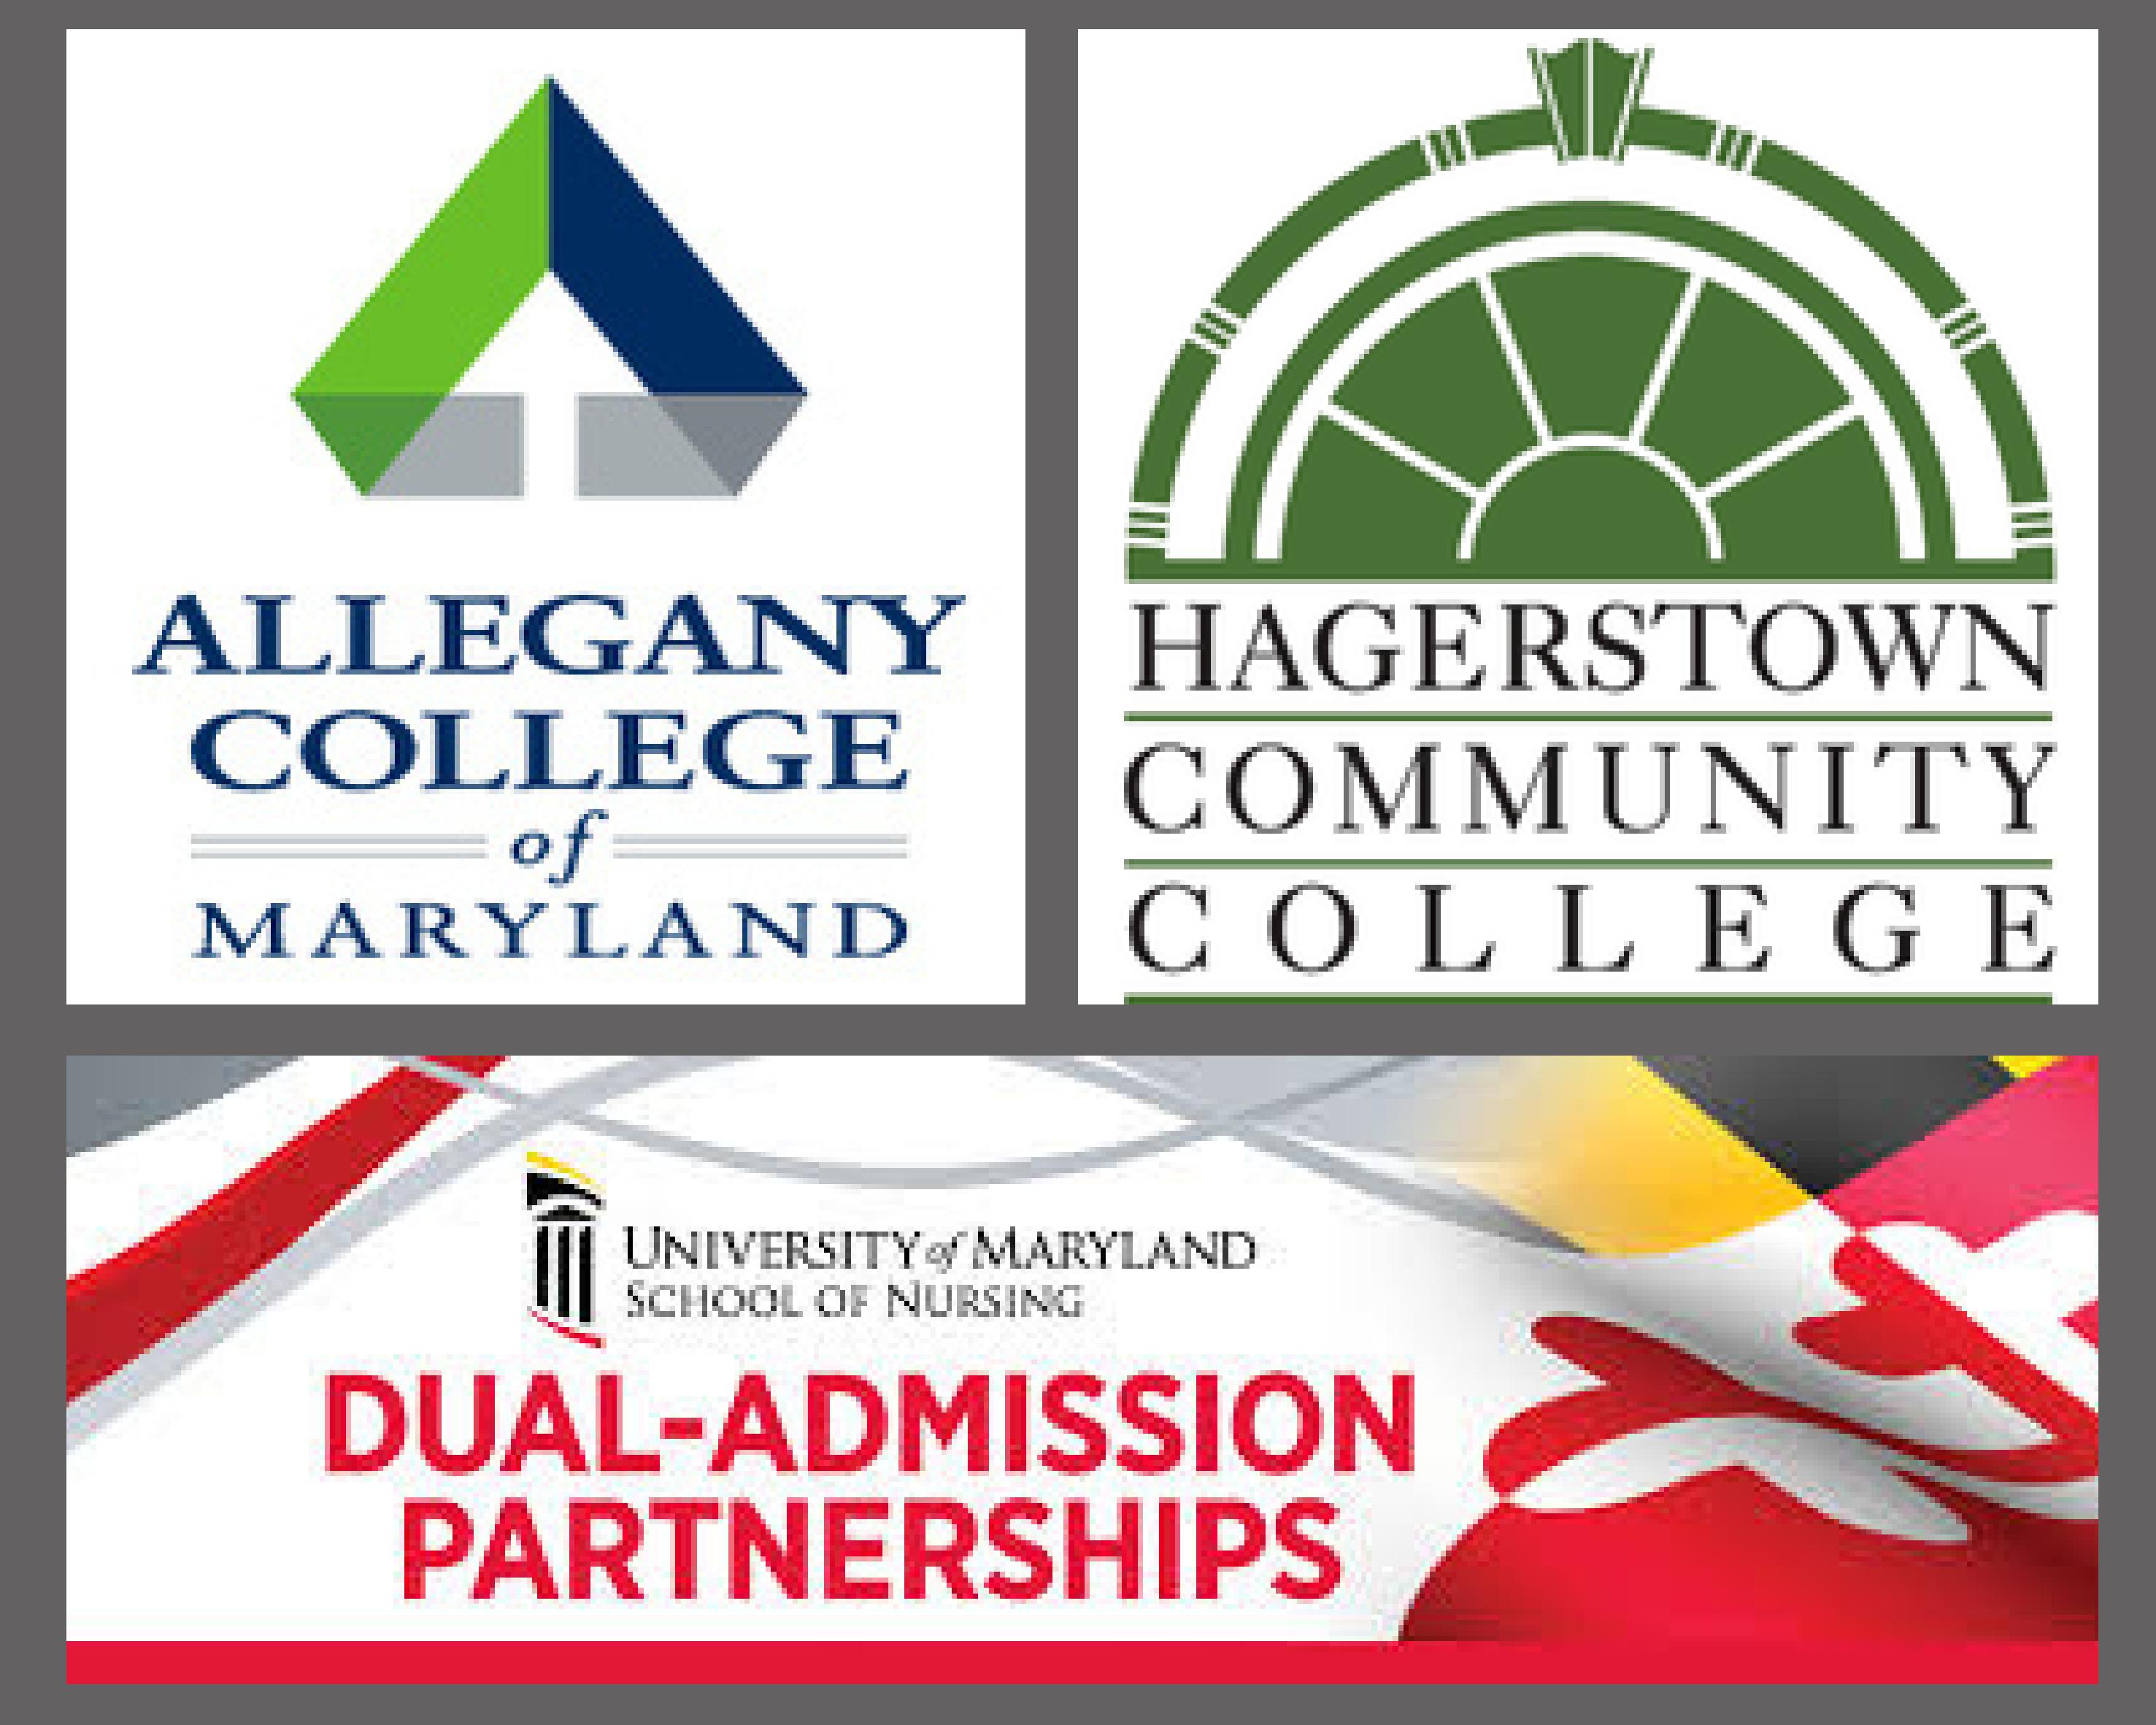 Partnerships with Hagerstown Community College and Allegany College of Maryland mean any Maryland student enrolled in an Associate Degree in Nursing program can begin earning credits toward their Bachelor of Science in Nursing at the University of Maryland School of Nursing. 